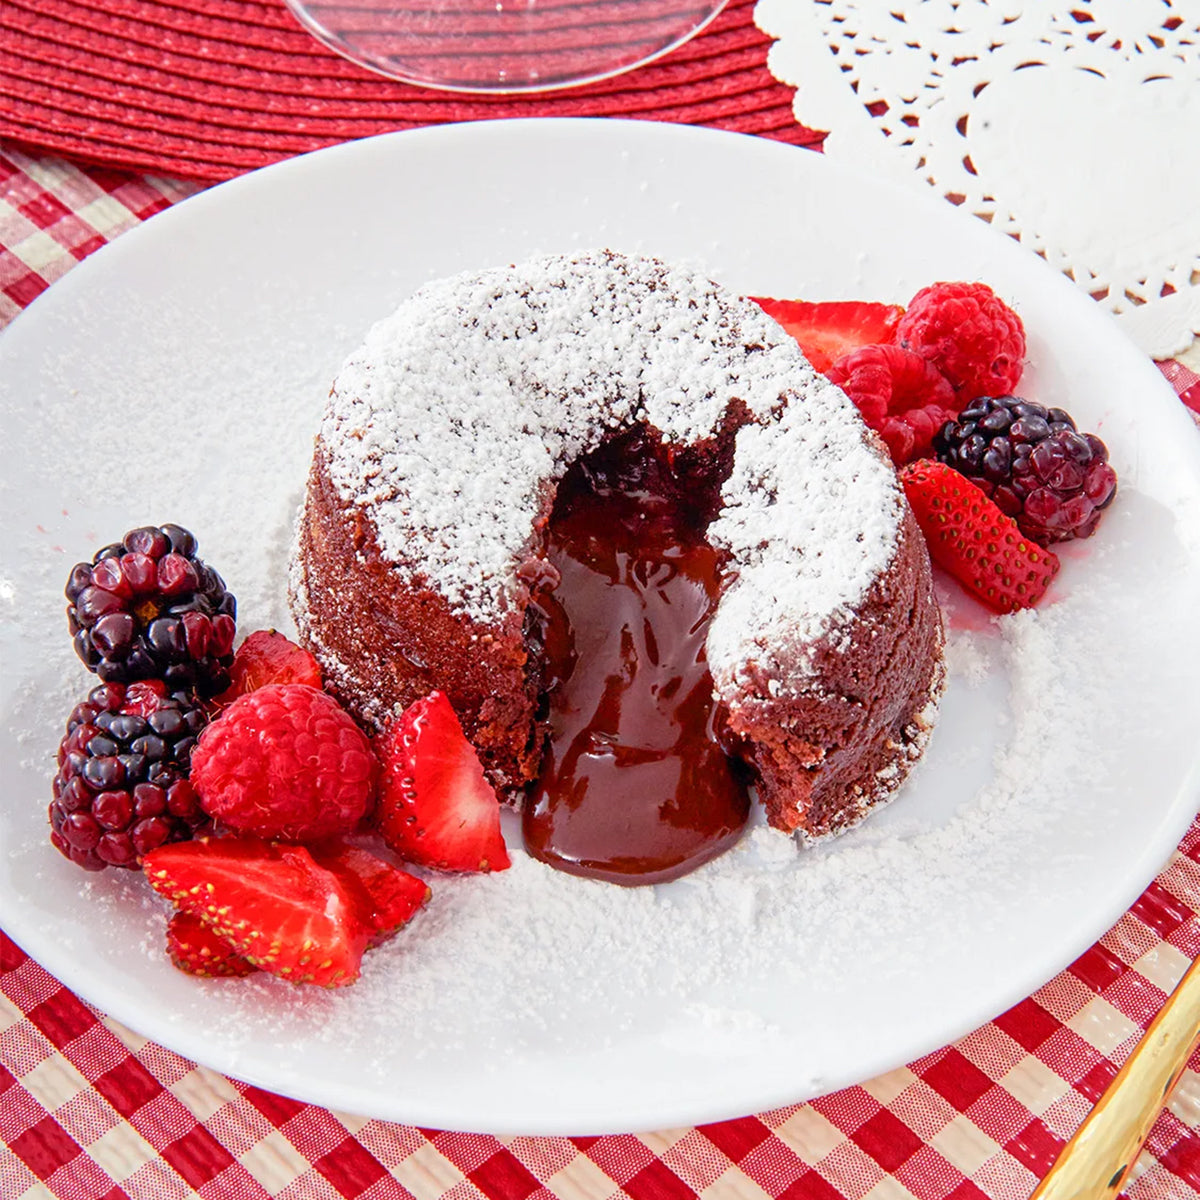 I Lost 10 lbs Eating Chocolate Molten Lava Cakes! - Love's7Grace